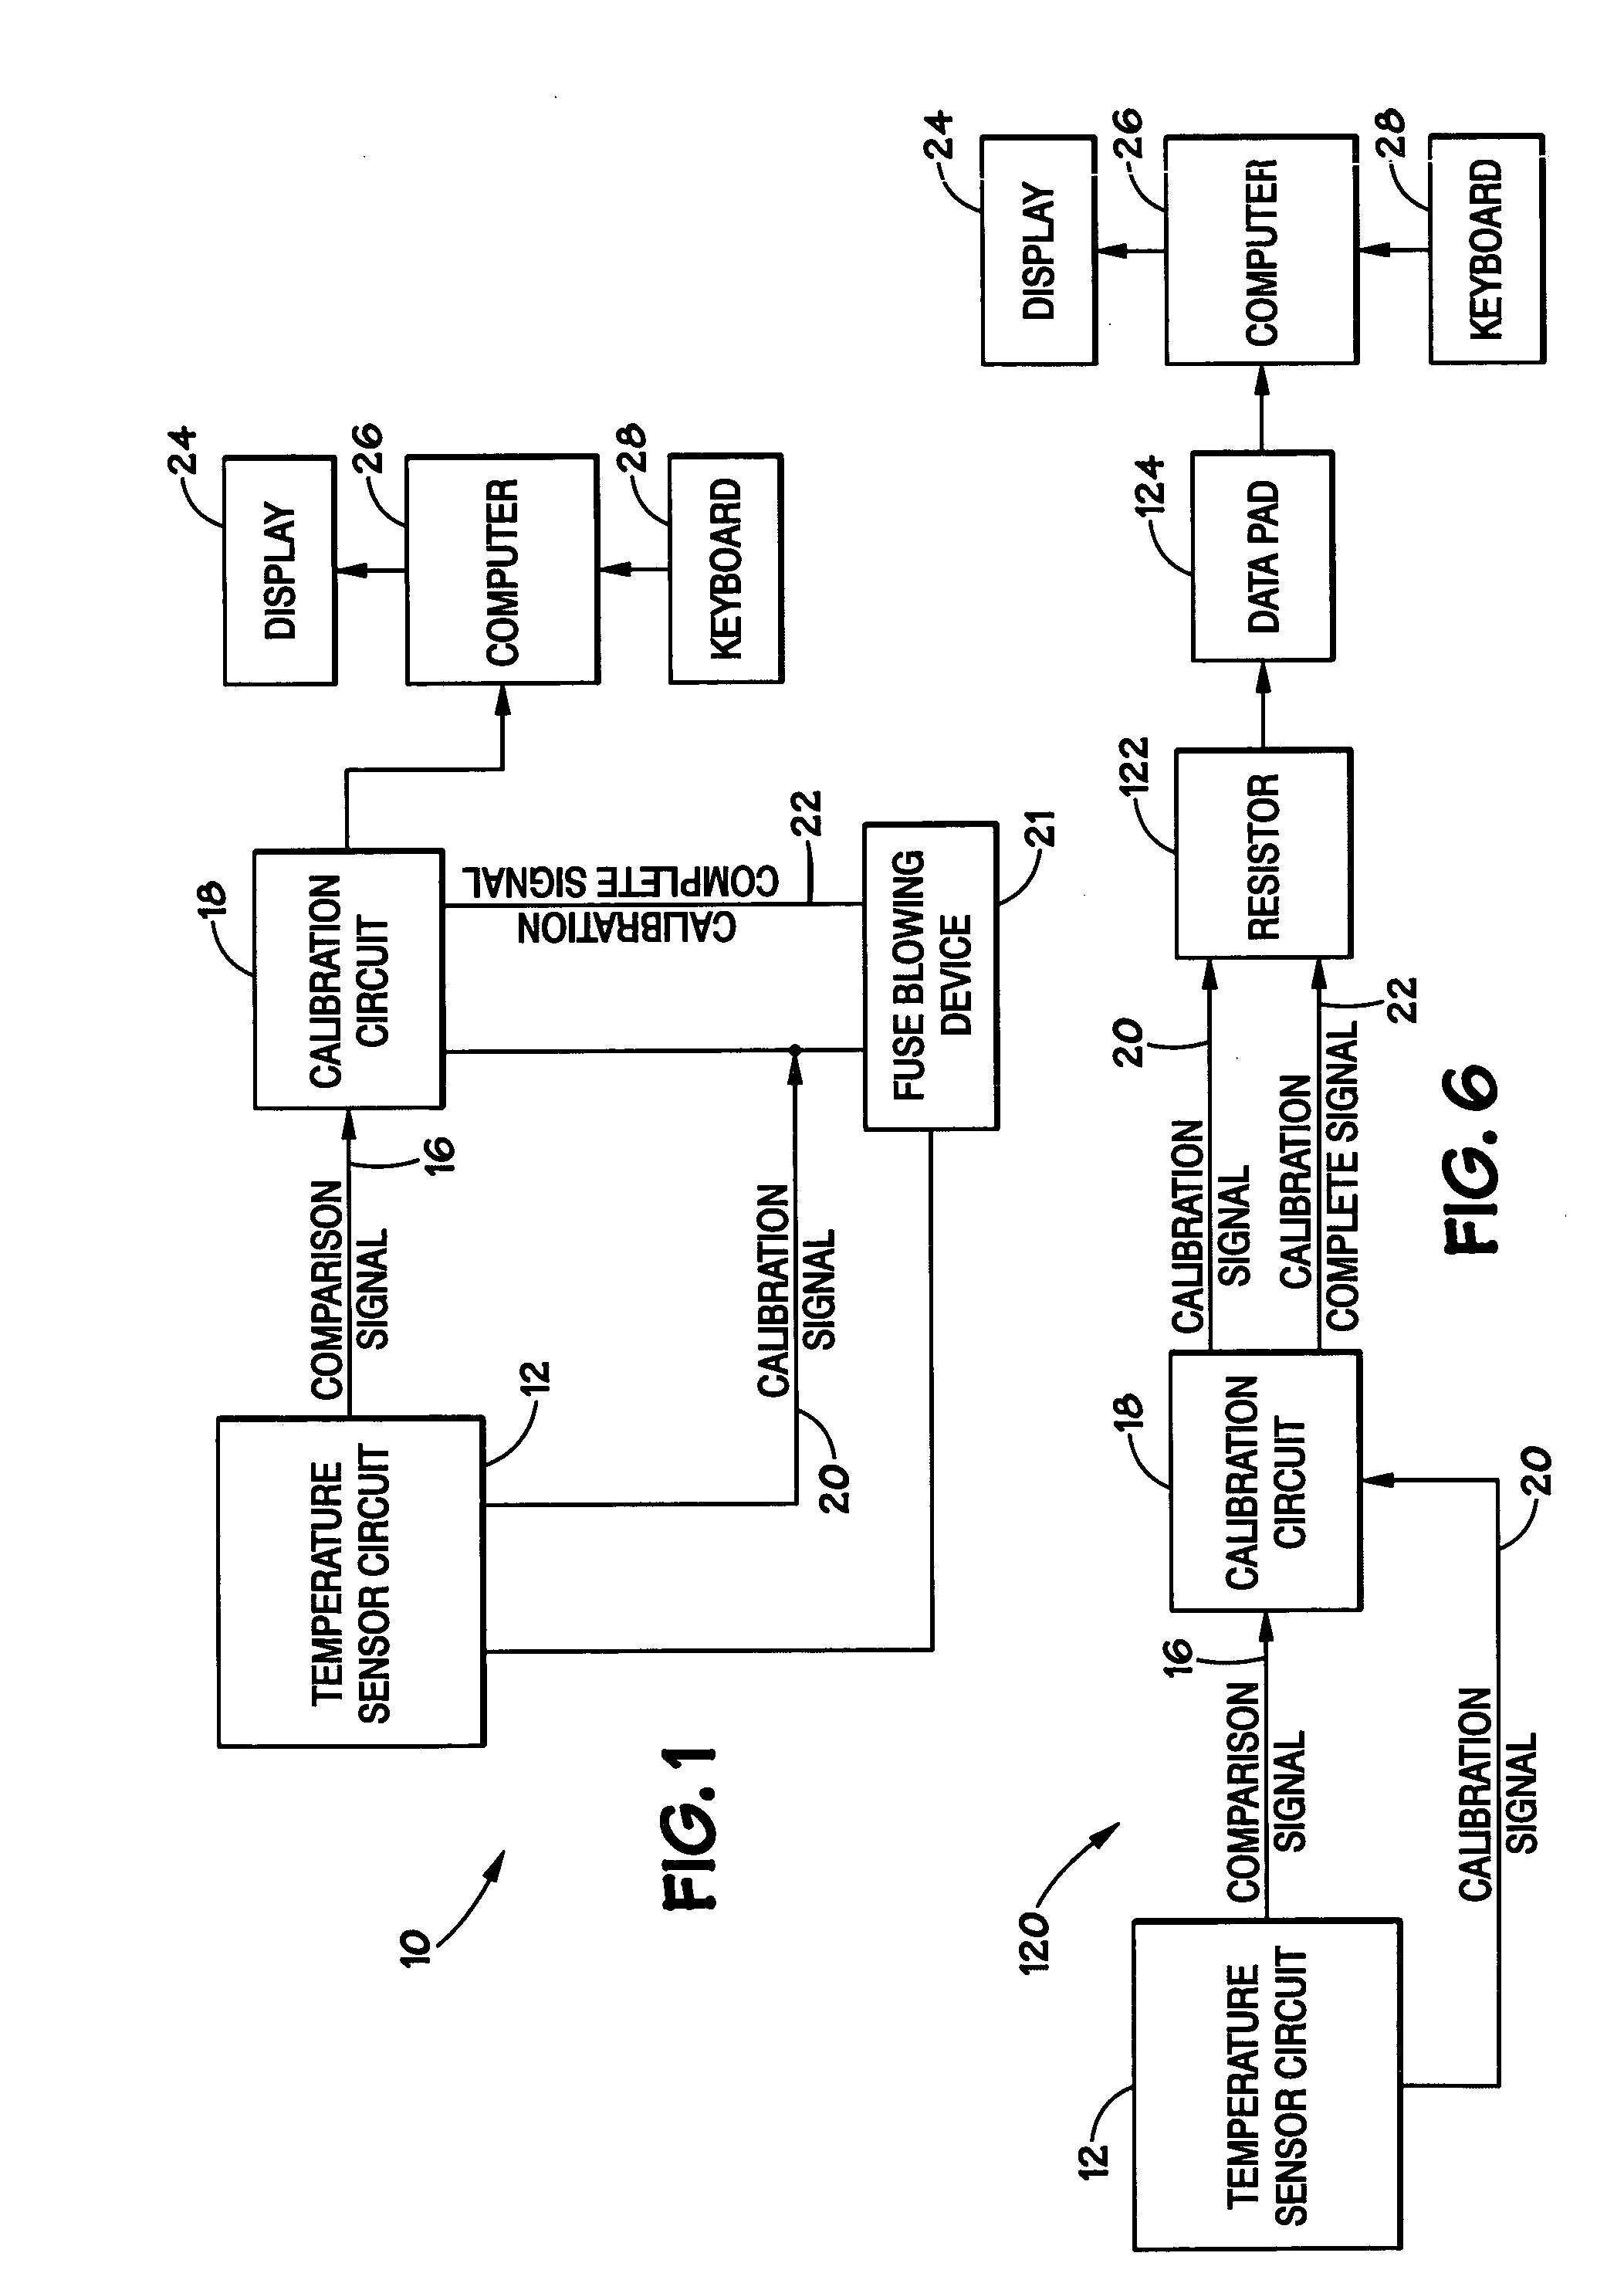 System and method for automatically calibrating a temperature sensor